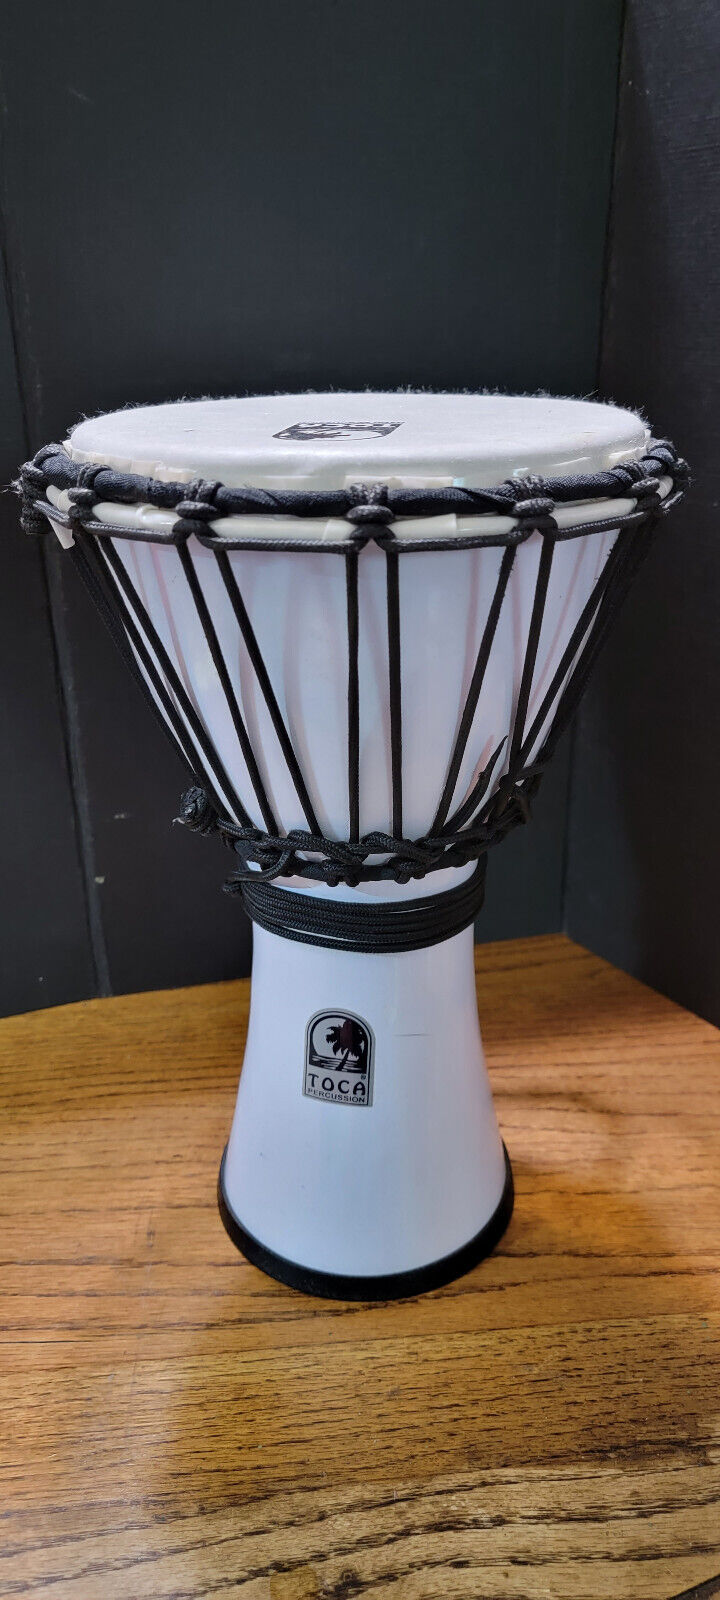 Toca Rope Tuned Hand Percussion Hand Drum 12"x7” White Djembe